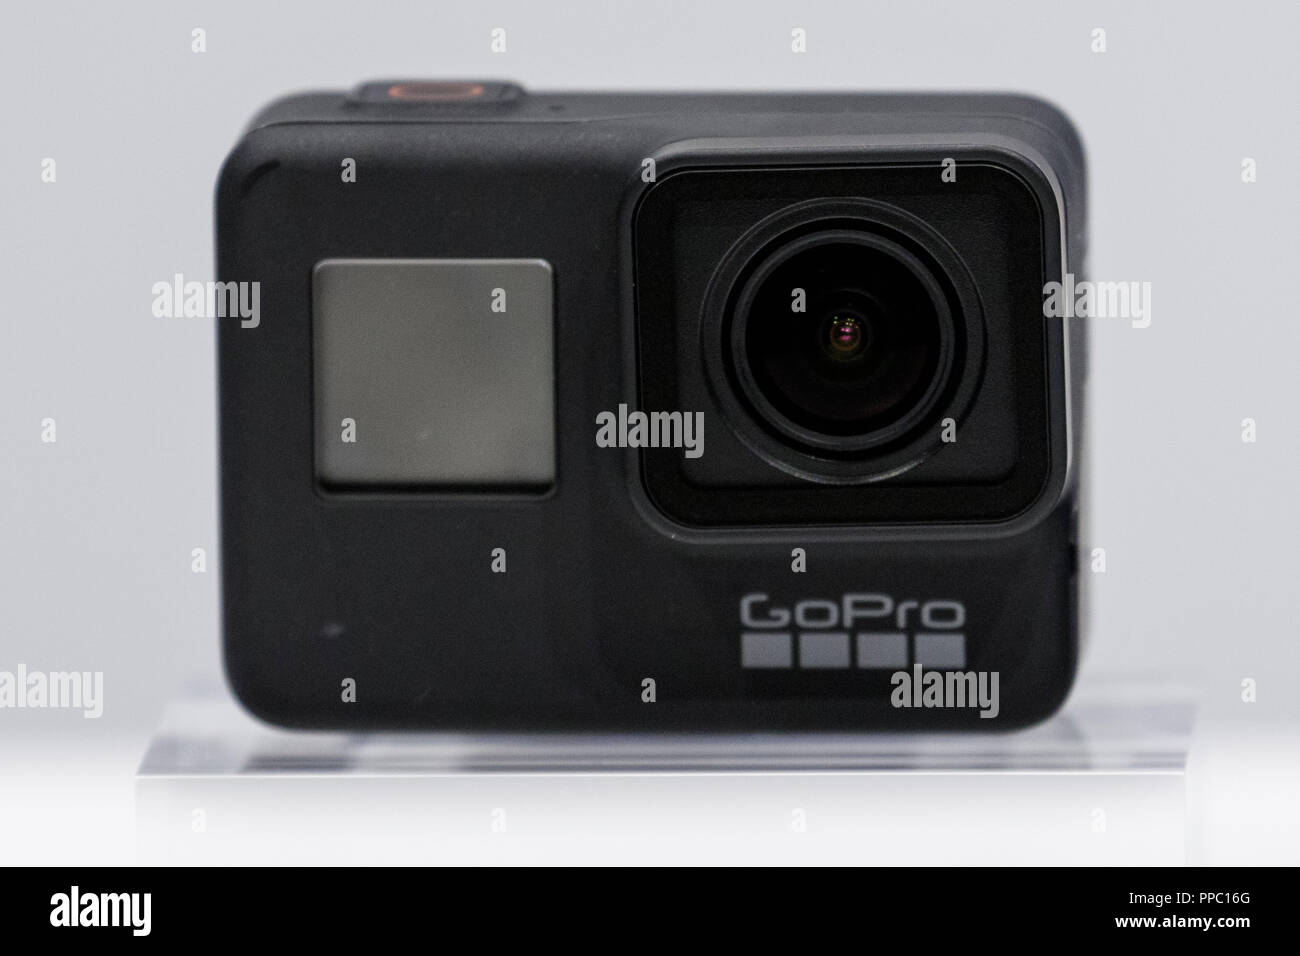 Tokyo, Japan. 25th Sep 2018. GoPro Hero 7 Black camera is seen during the  presentation of company's new products on September 25, 2018, Tokyo, Japan.  The new Hero 7 Black is being